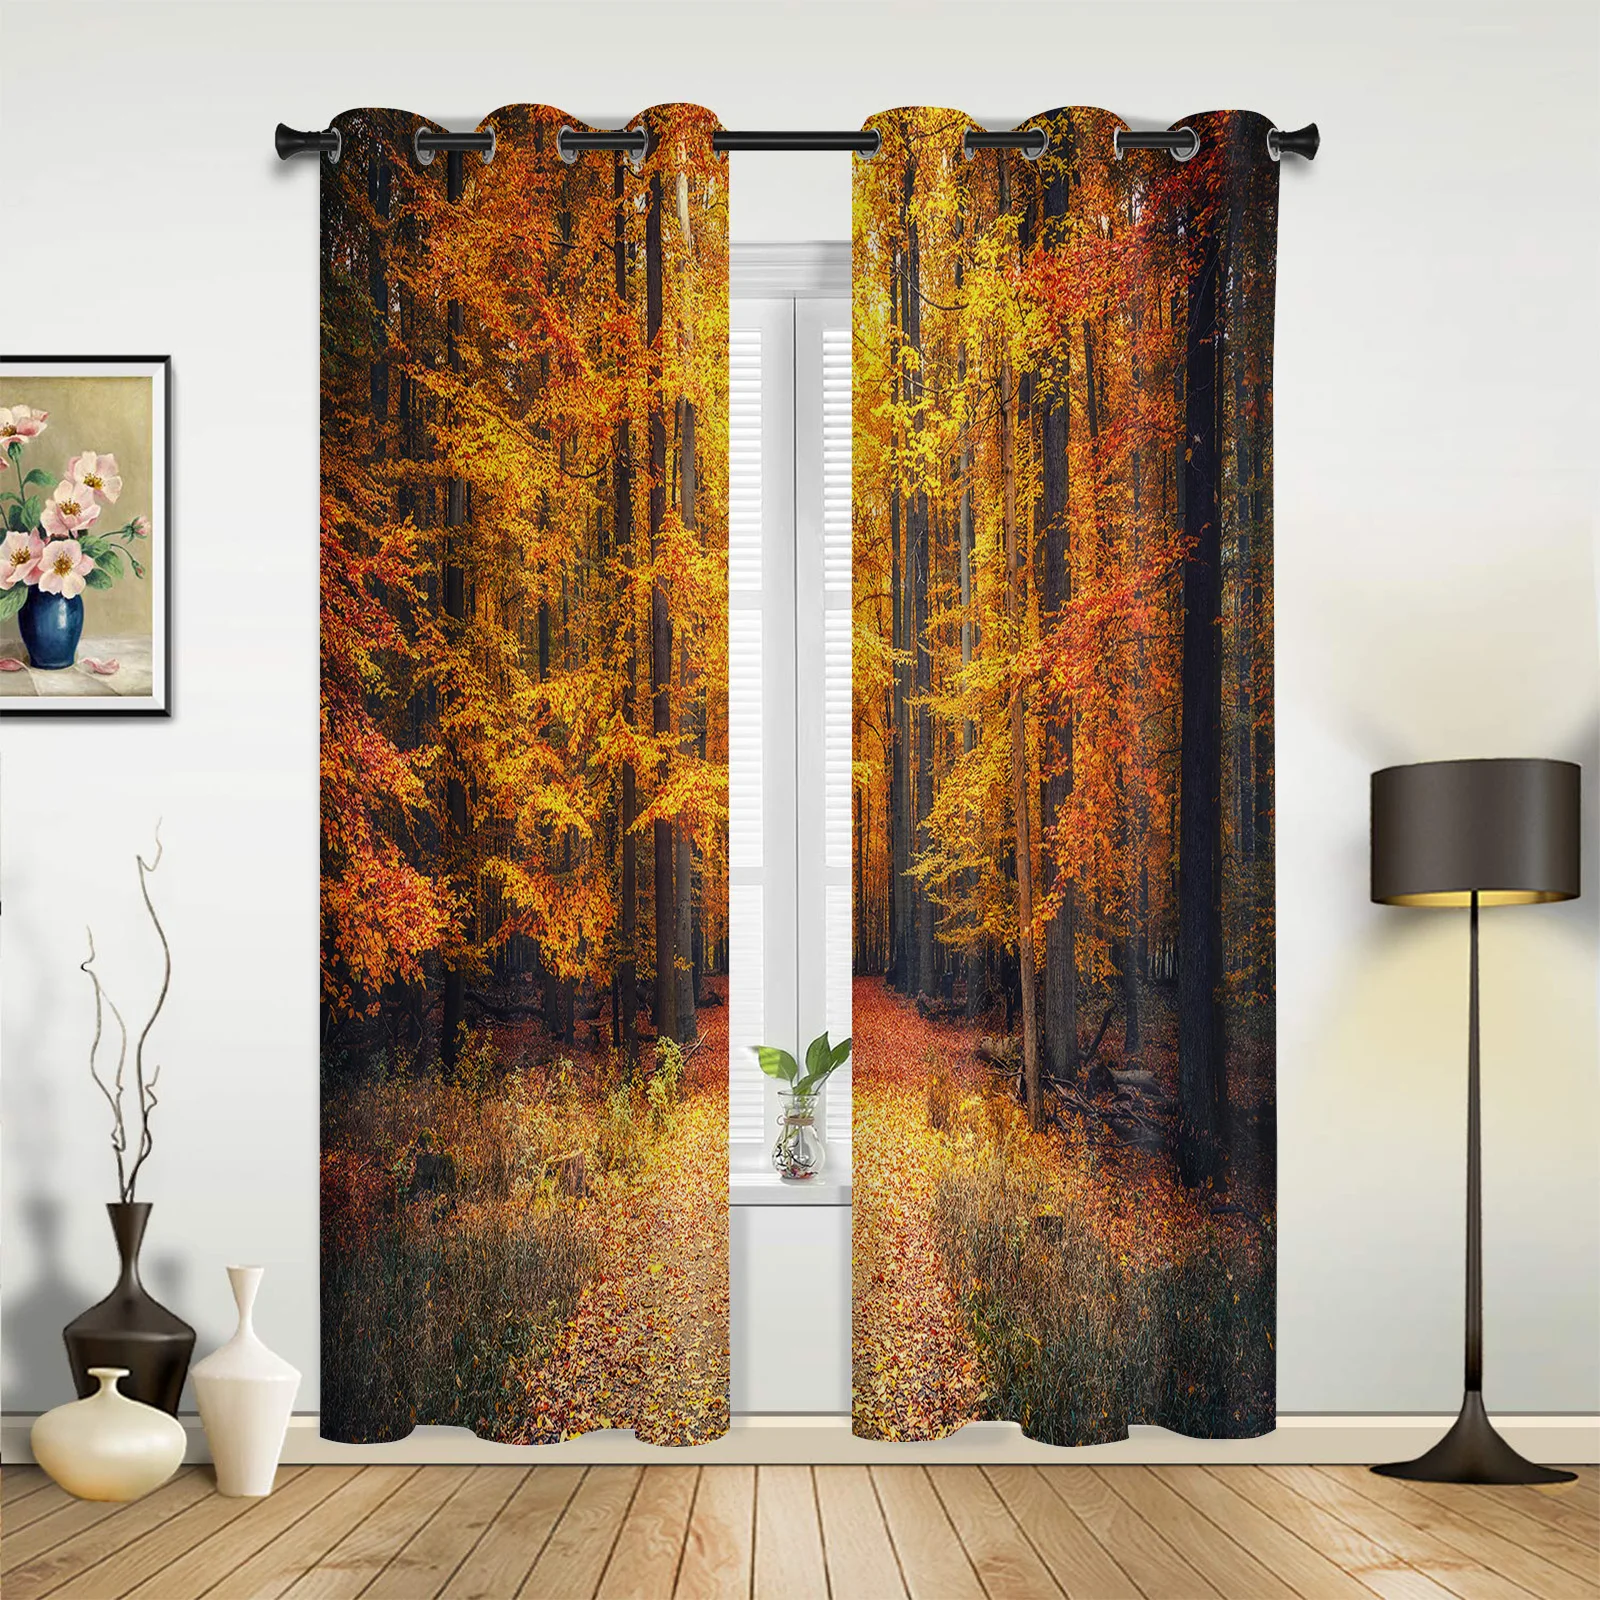 

Autumn Park Forest Curtains for Bedroom Living Room Drapes Kitchen Children's Room Window Curtain Modern Home Decor